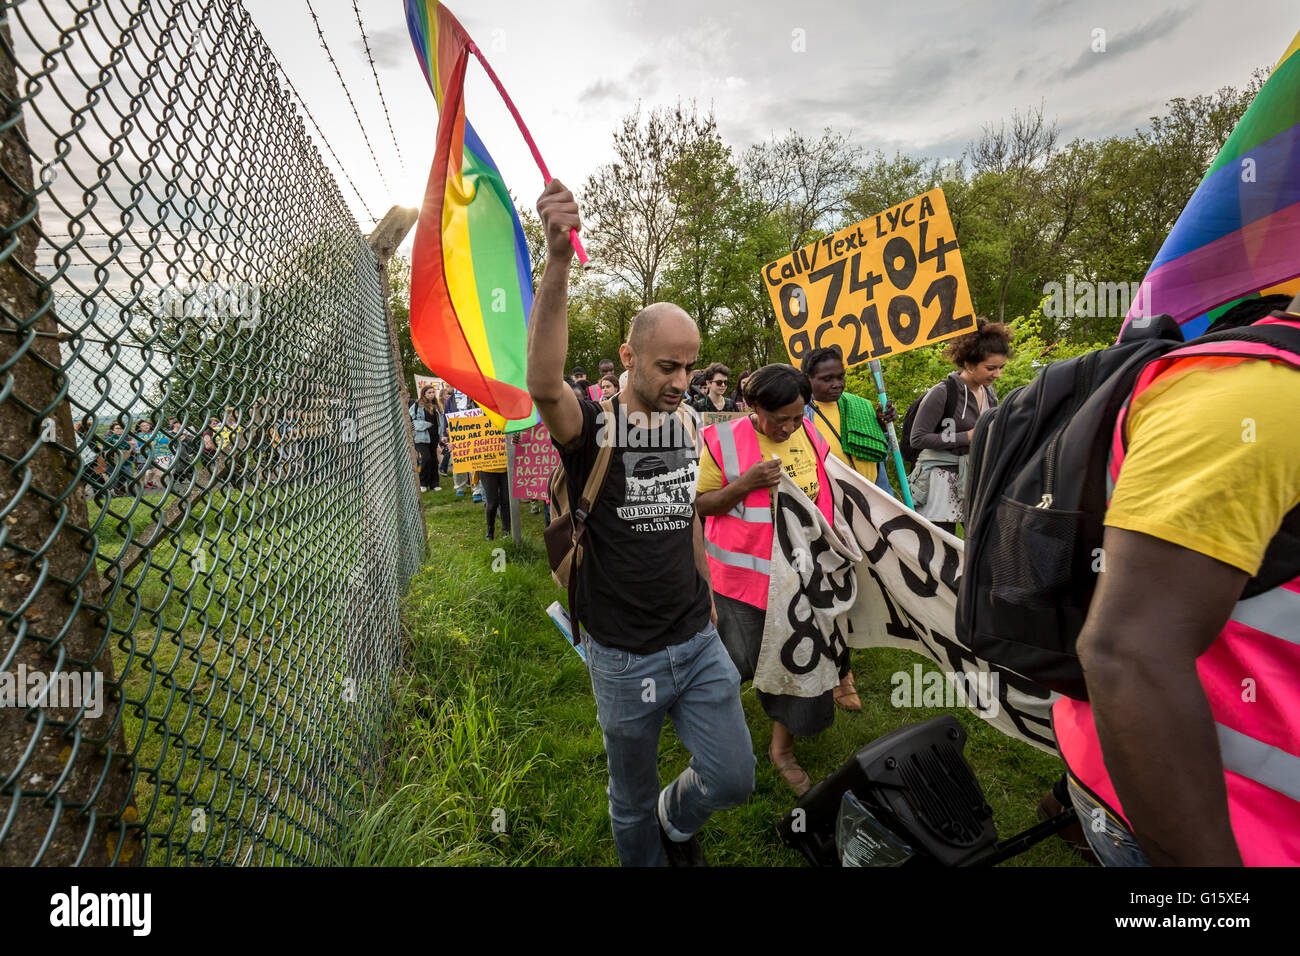 Bedfordshire, UK. 7th May, 2016. Shut Down Yarl’s Wood Immigration Removal Detention Centre mass protest © Guy Corbishley/Alamy Live News Stock Photo